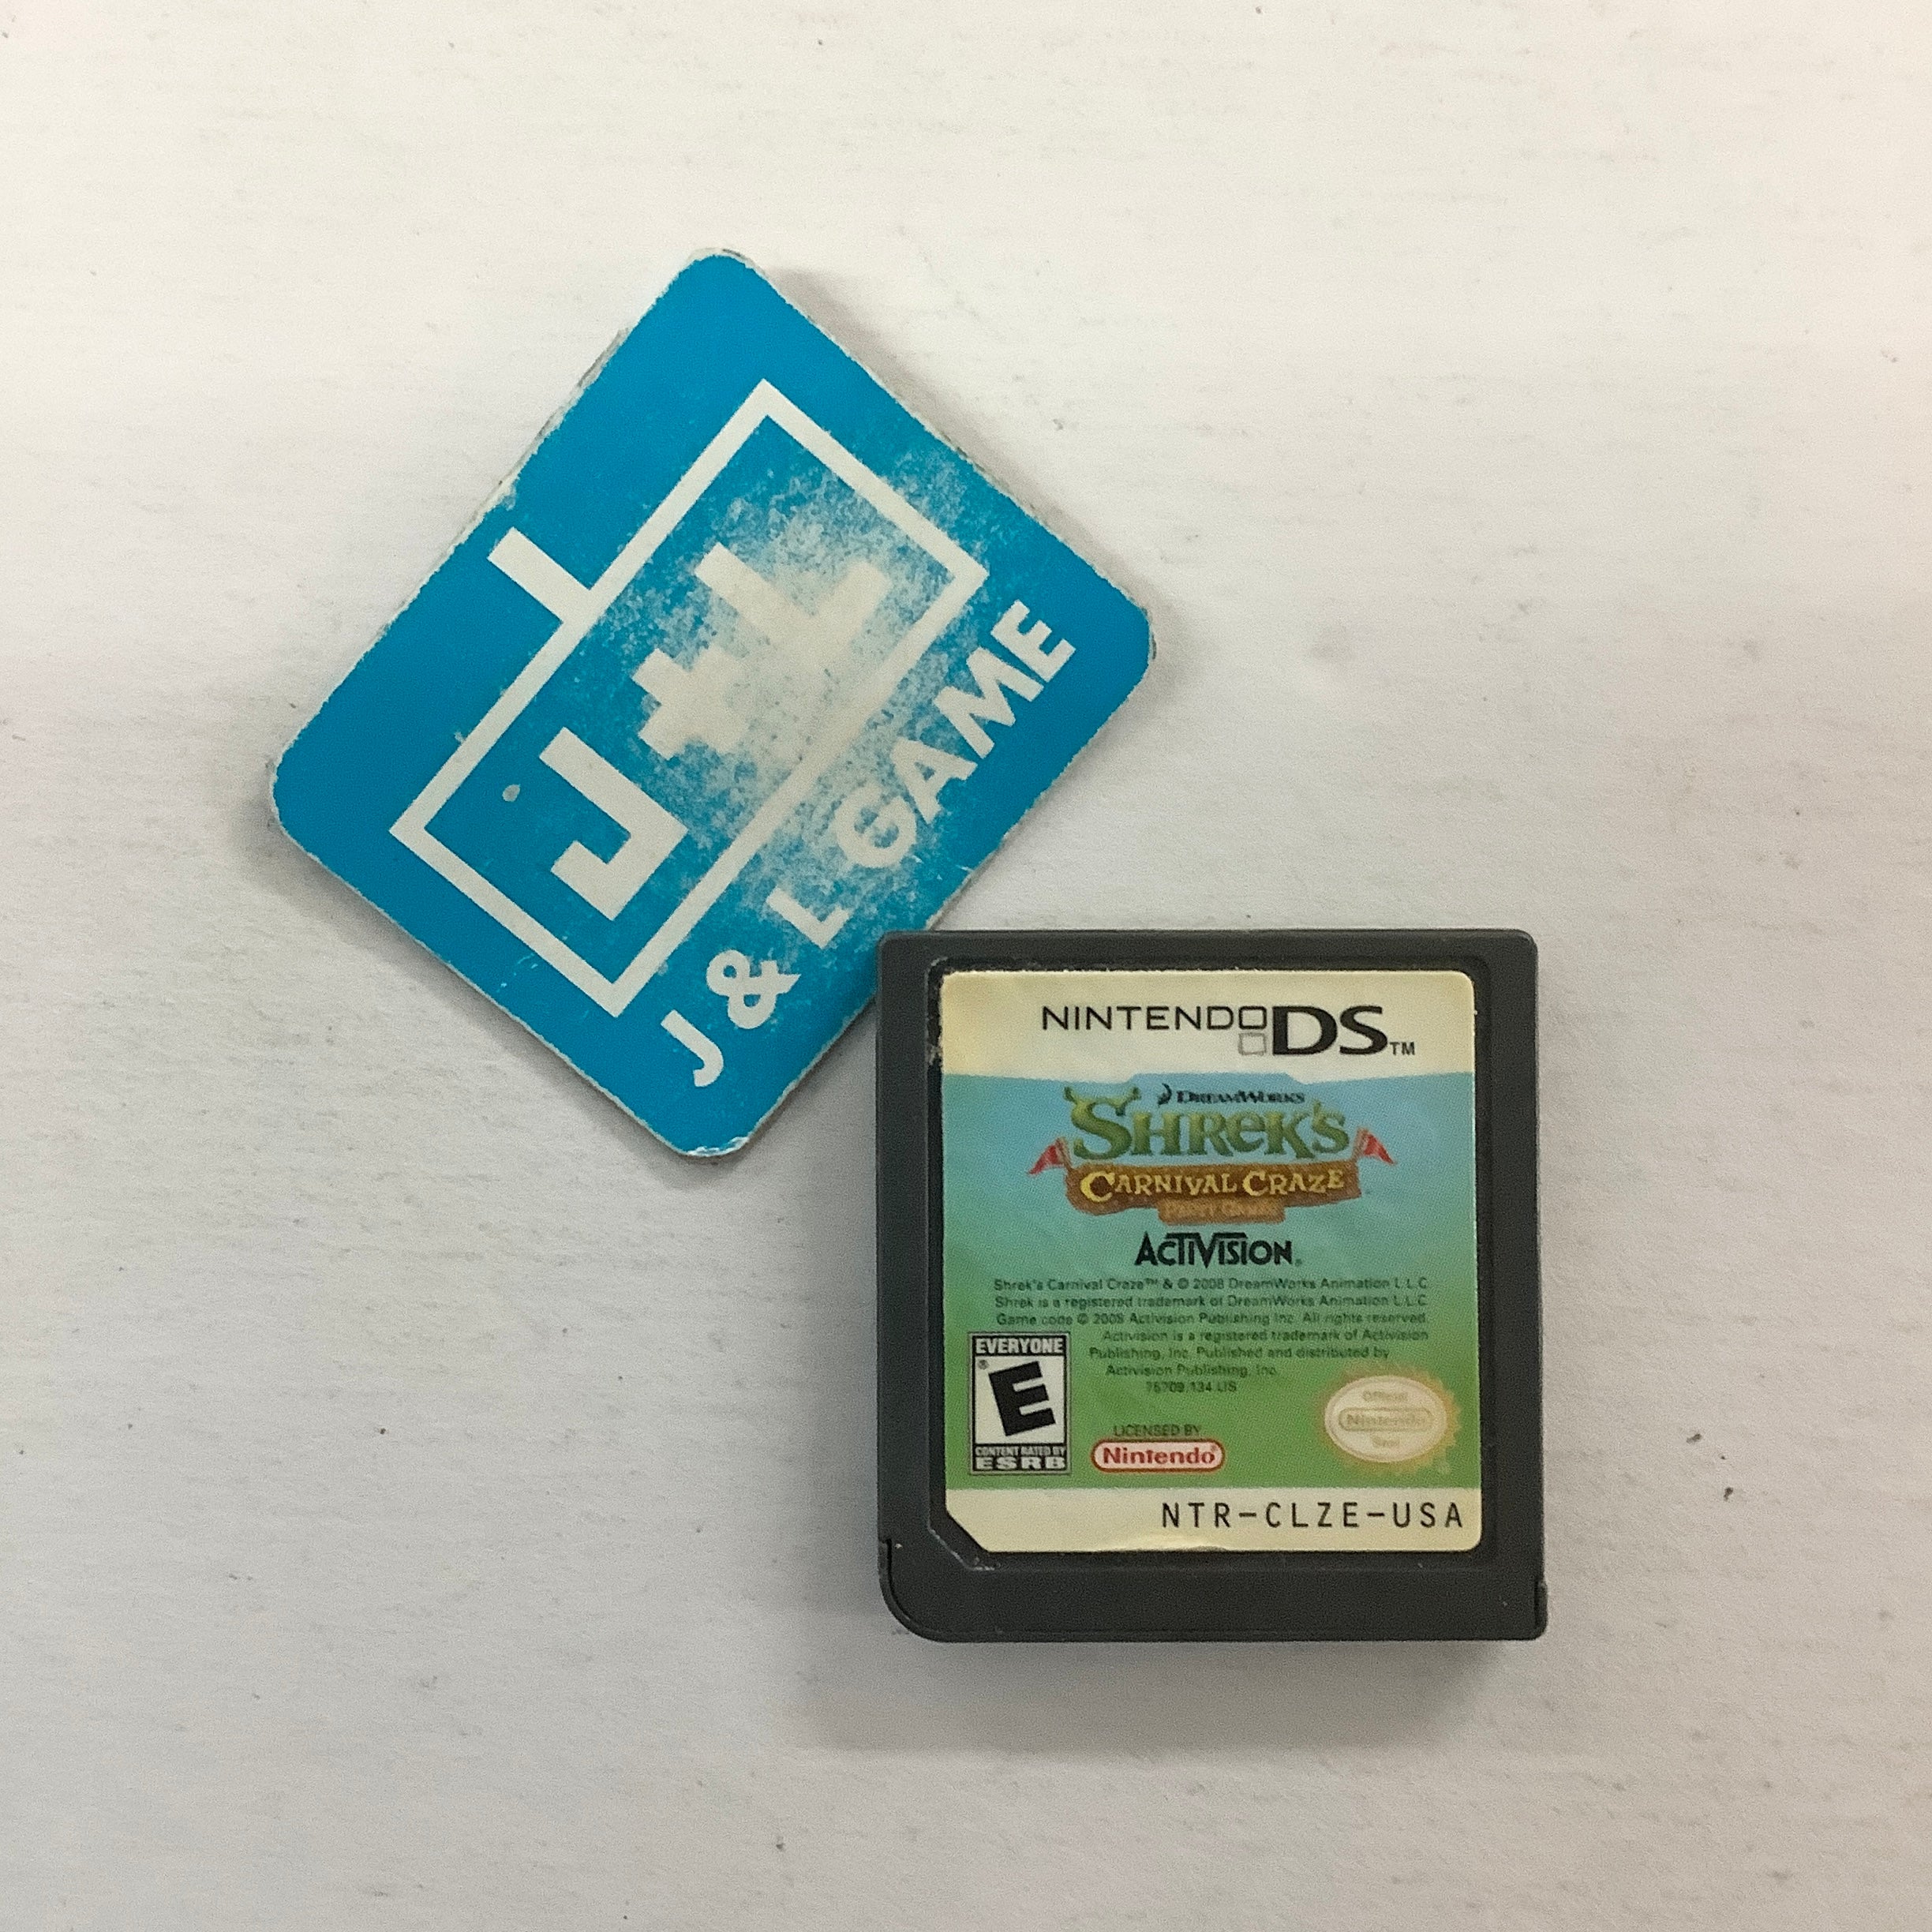 Shrek's Carnival Craze Party Games - (NDS) Nintendo DS [Pre-Owned] Video Games Activision   